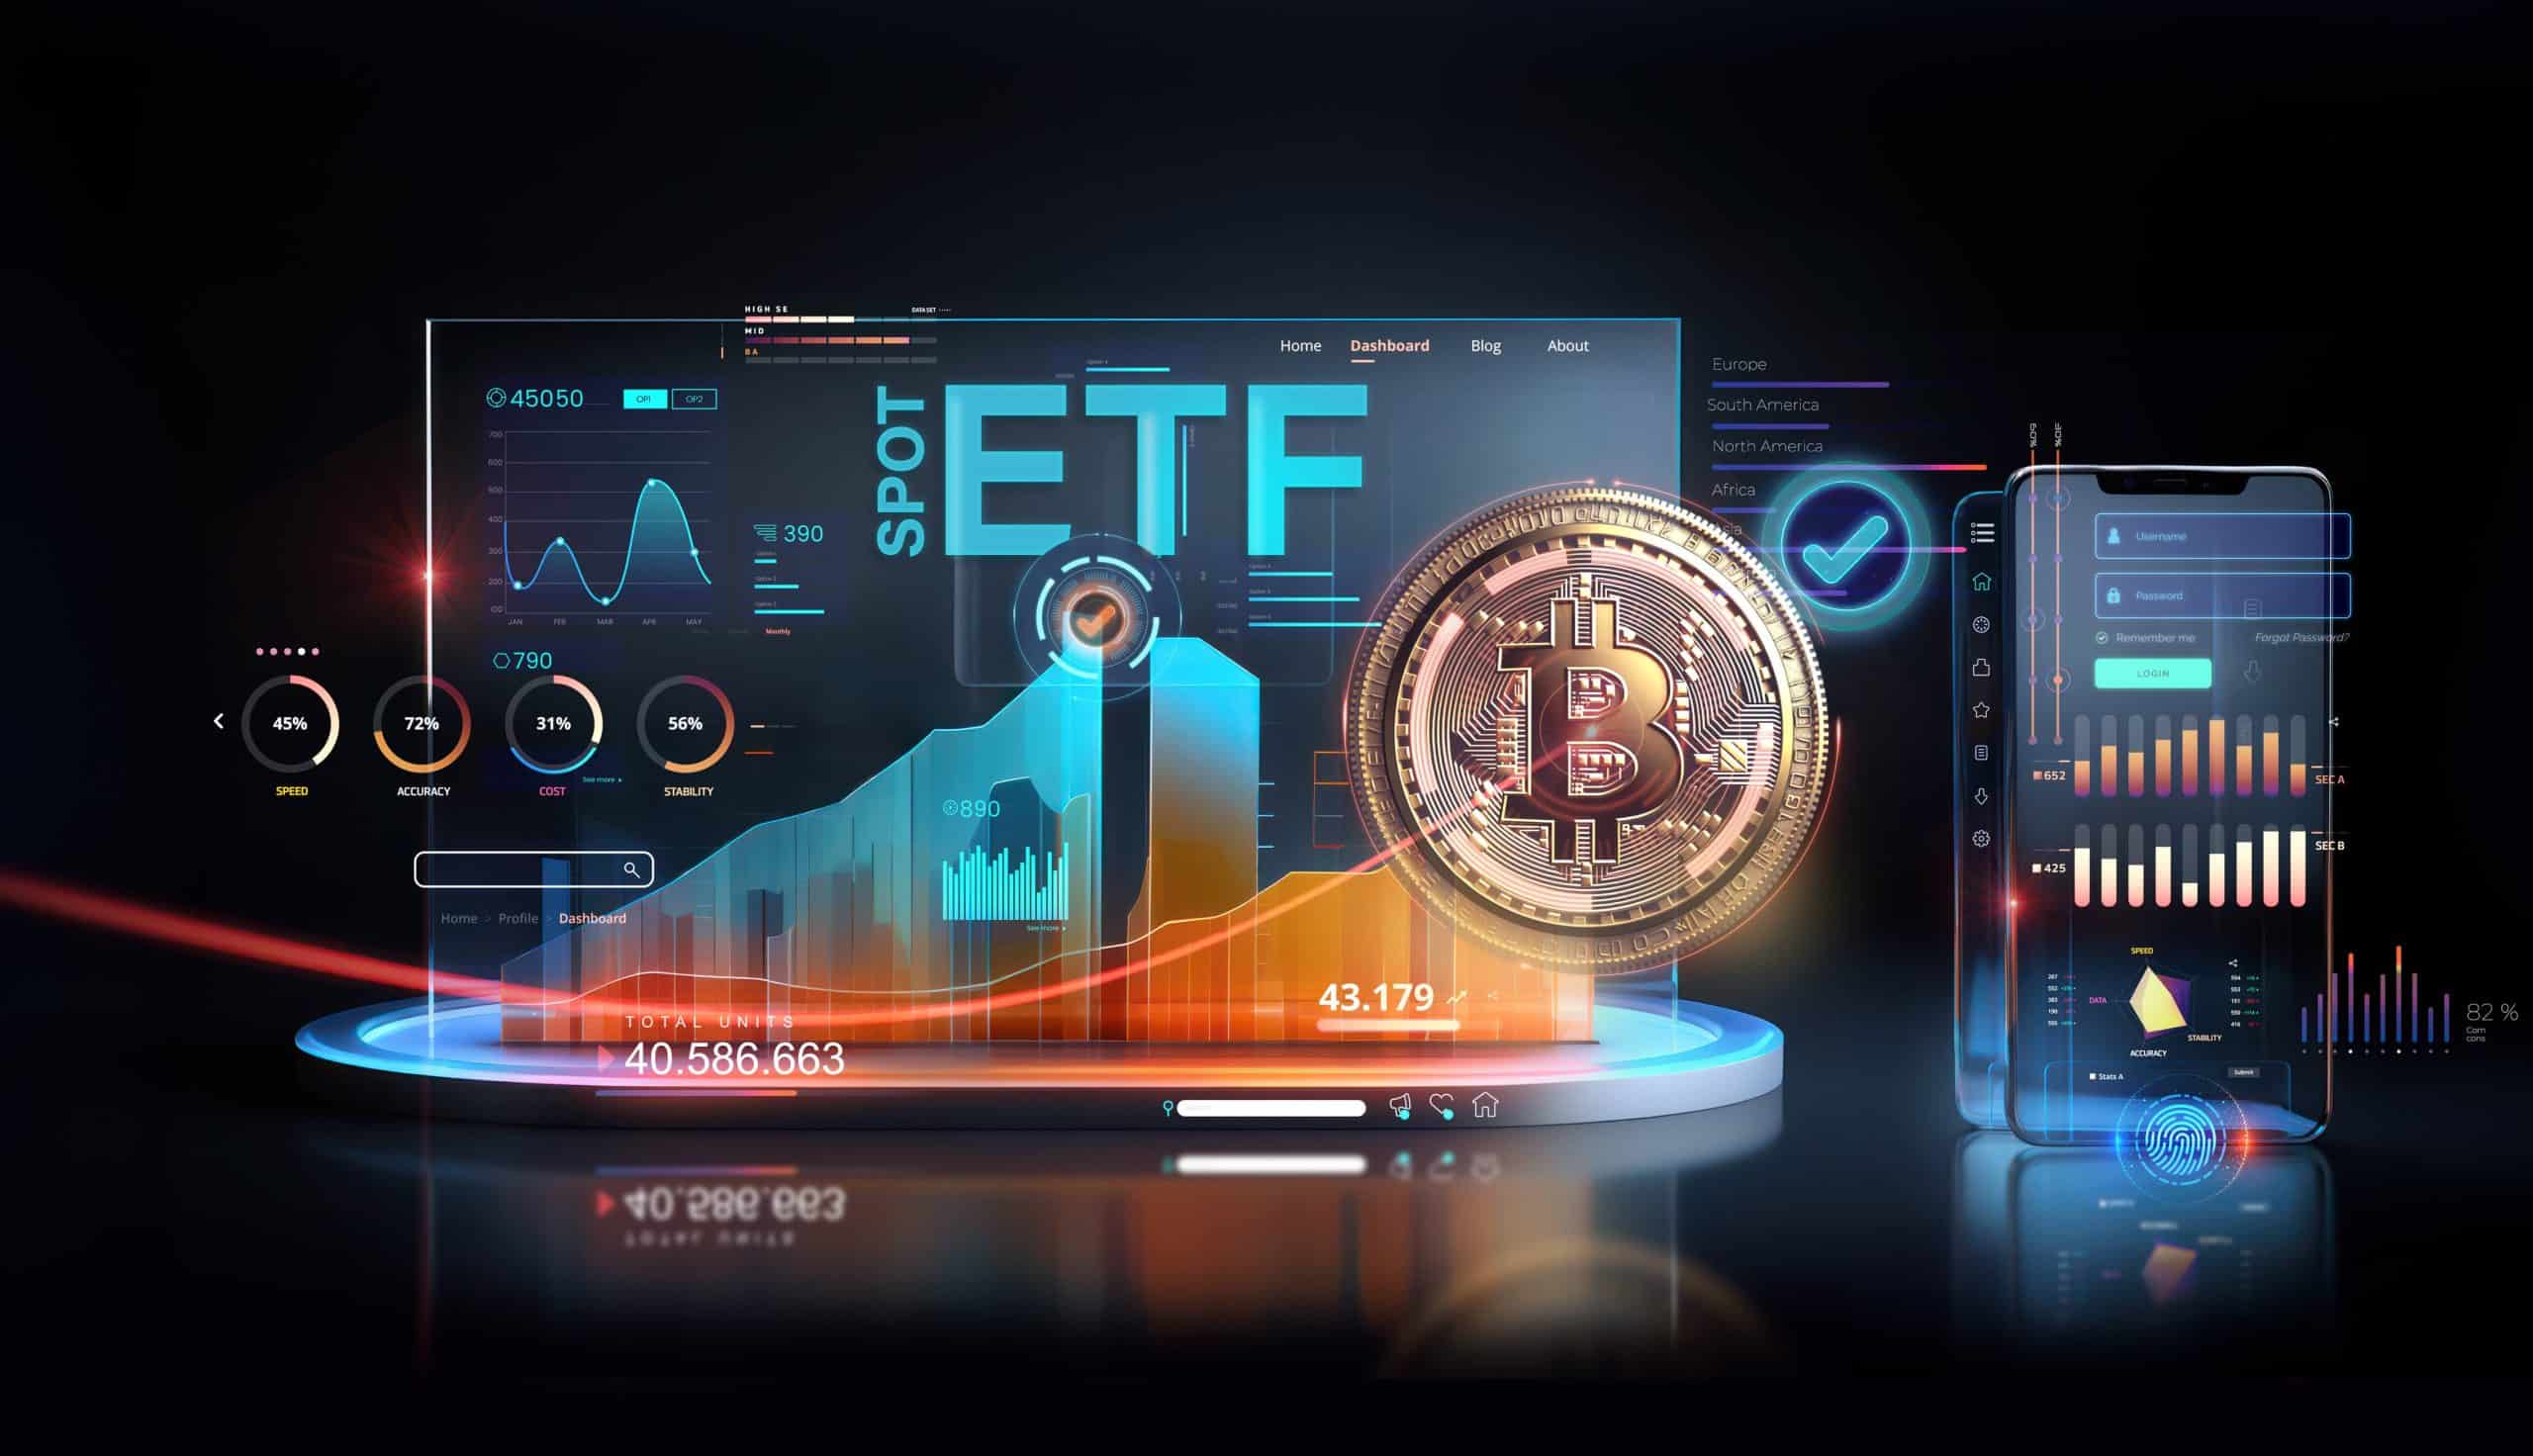 Robinhood’s Crypto Revenue Hits Lowest In 3 Years But Still Expands Crypto Operations + More Bitcoin ETF News